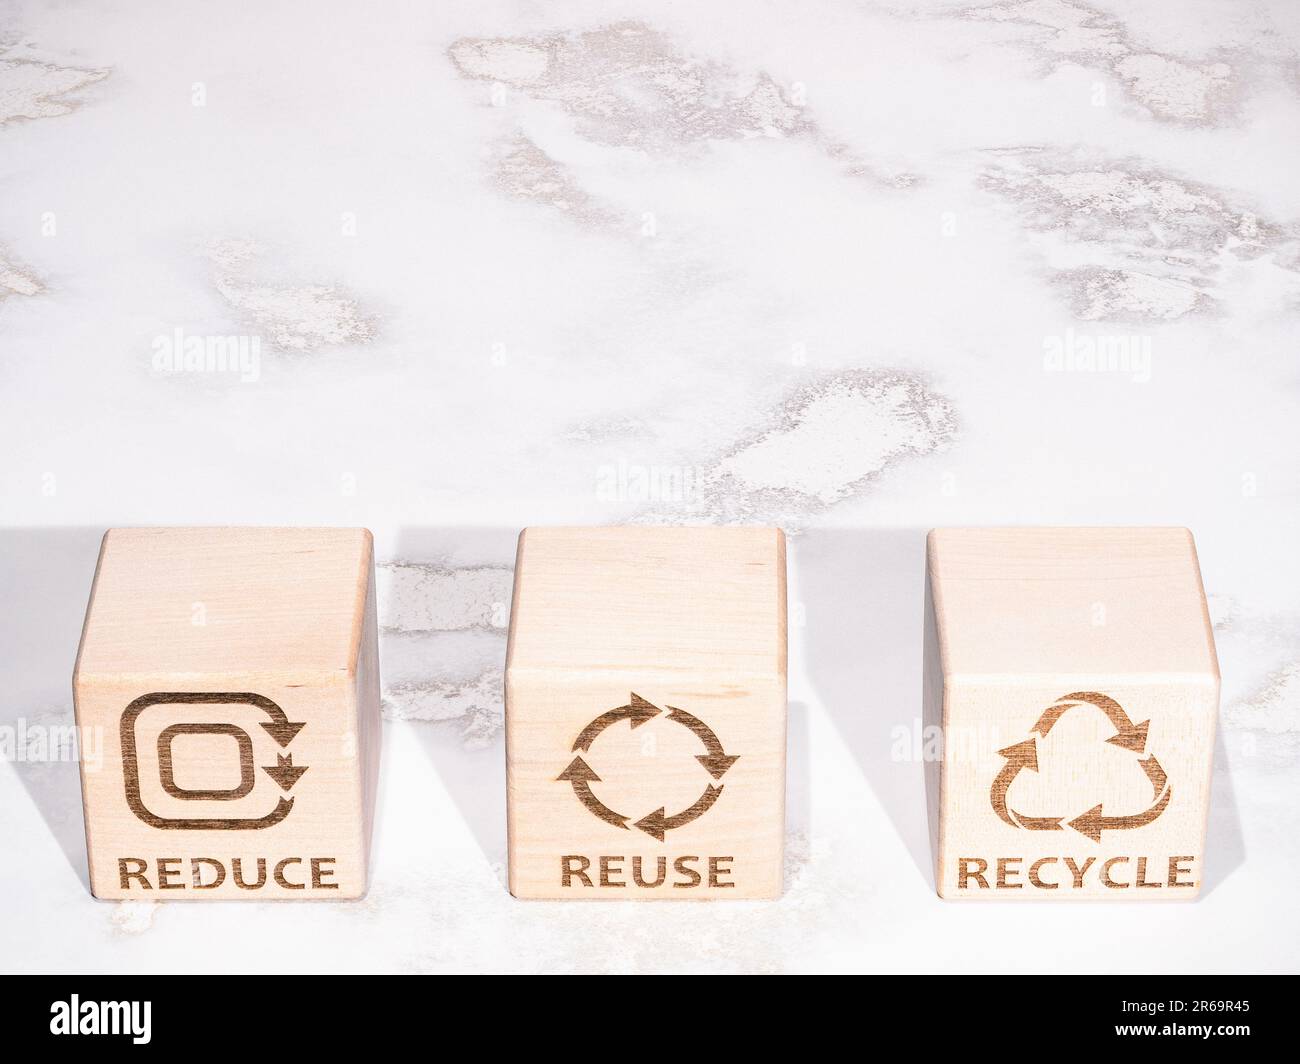 Reduce, Reuse, and Recycle resources consumption concept symbols Stock Photo